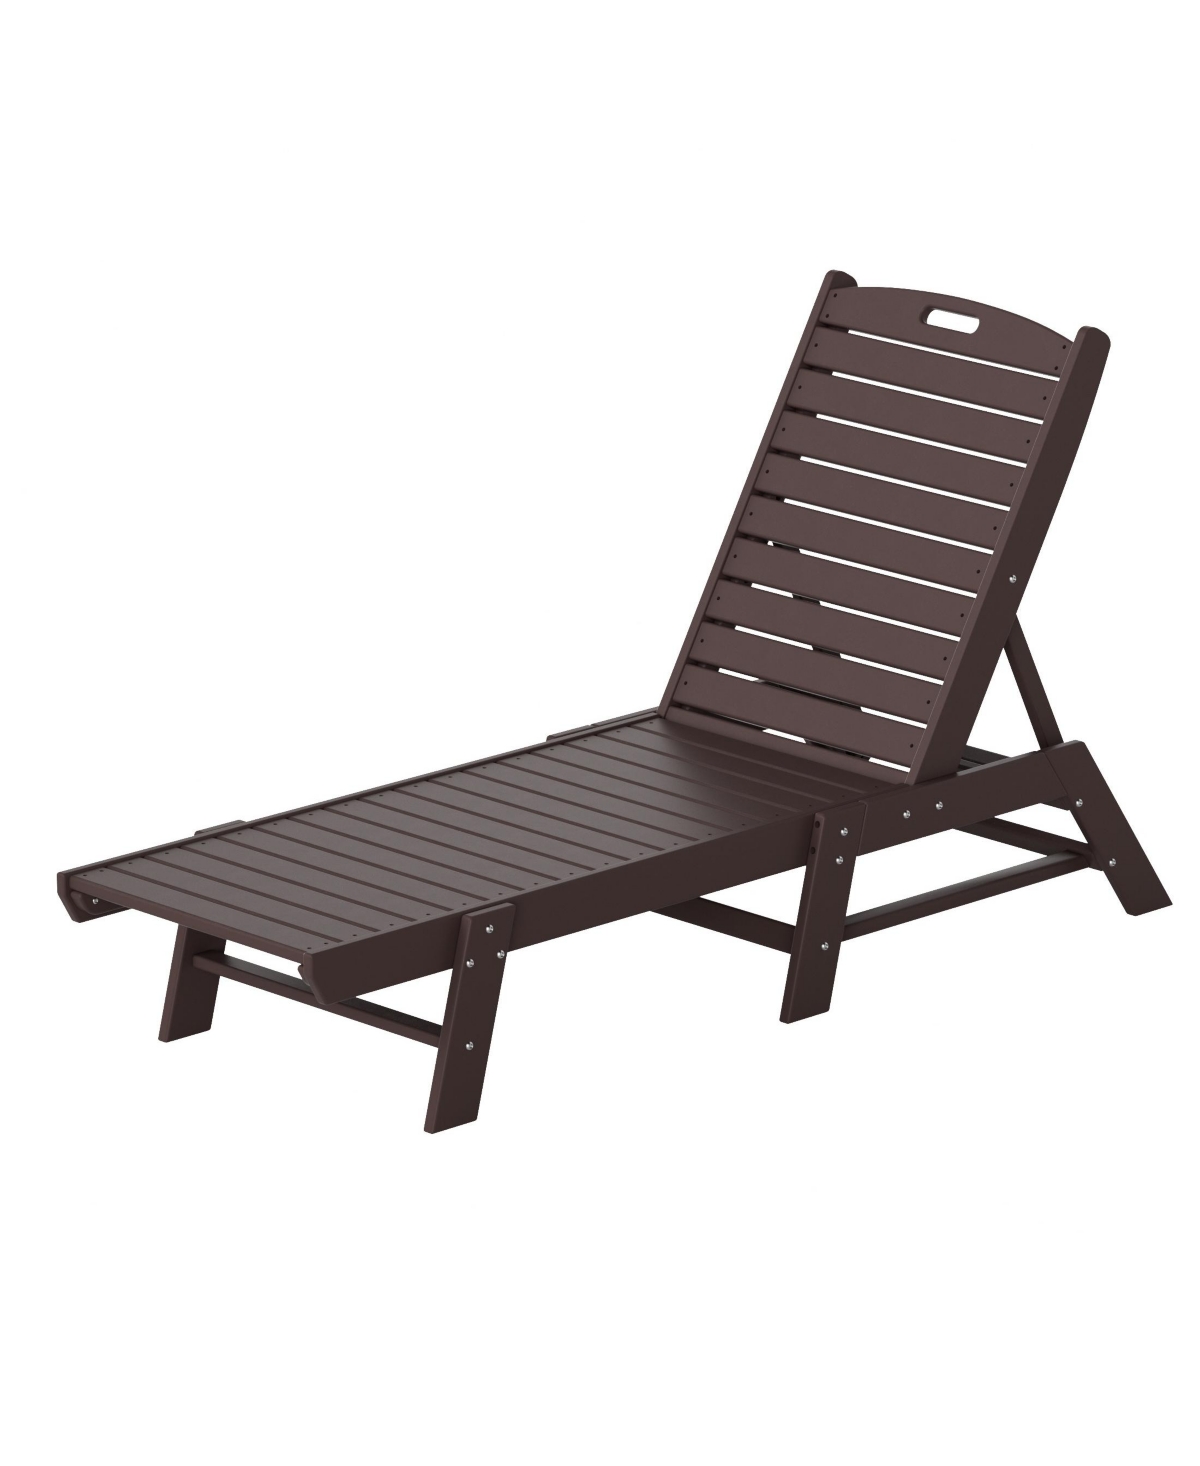 Westintrends Poly Reclining Outdoor Patio Chaise Lounge Chair Adjustable In Dark Brown